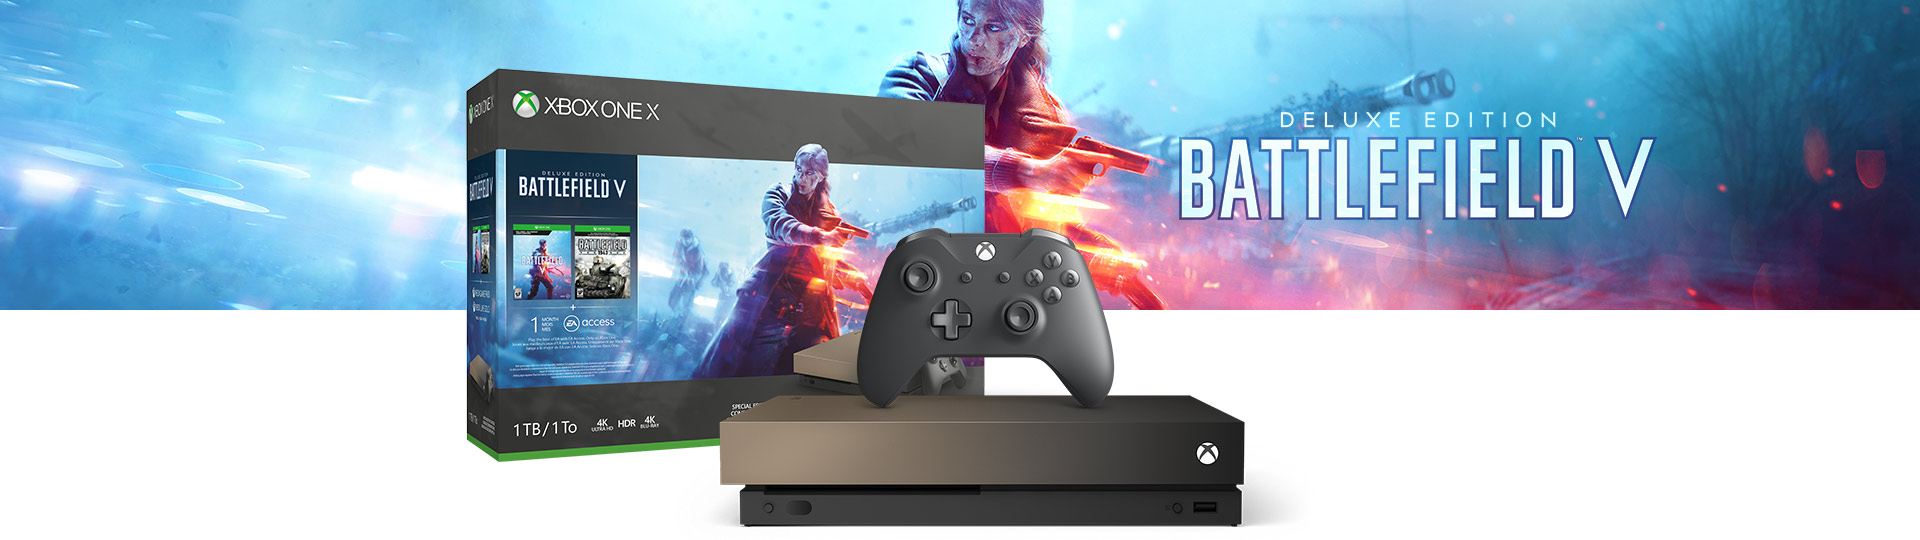 Xbox One X and Controller next to the Xbox One X Battlefield V Gold Rush Special Edition 1 terabyte product box